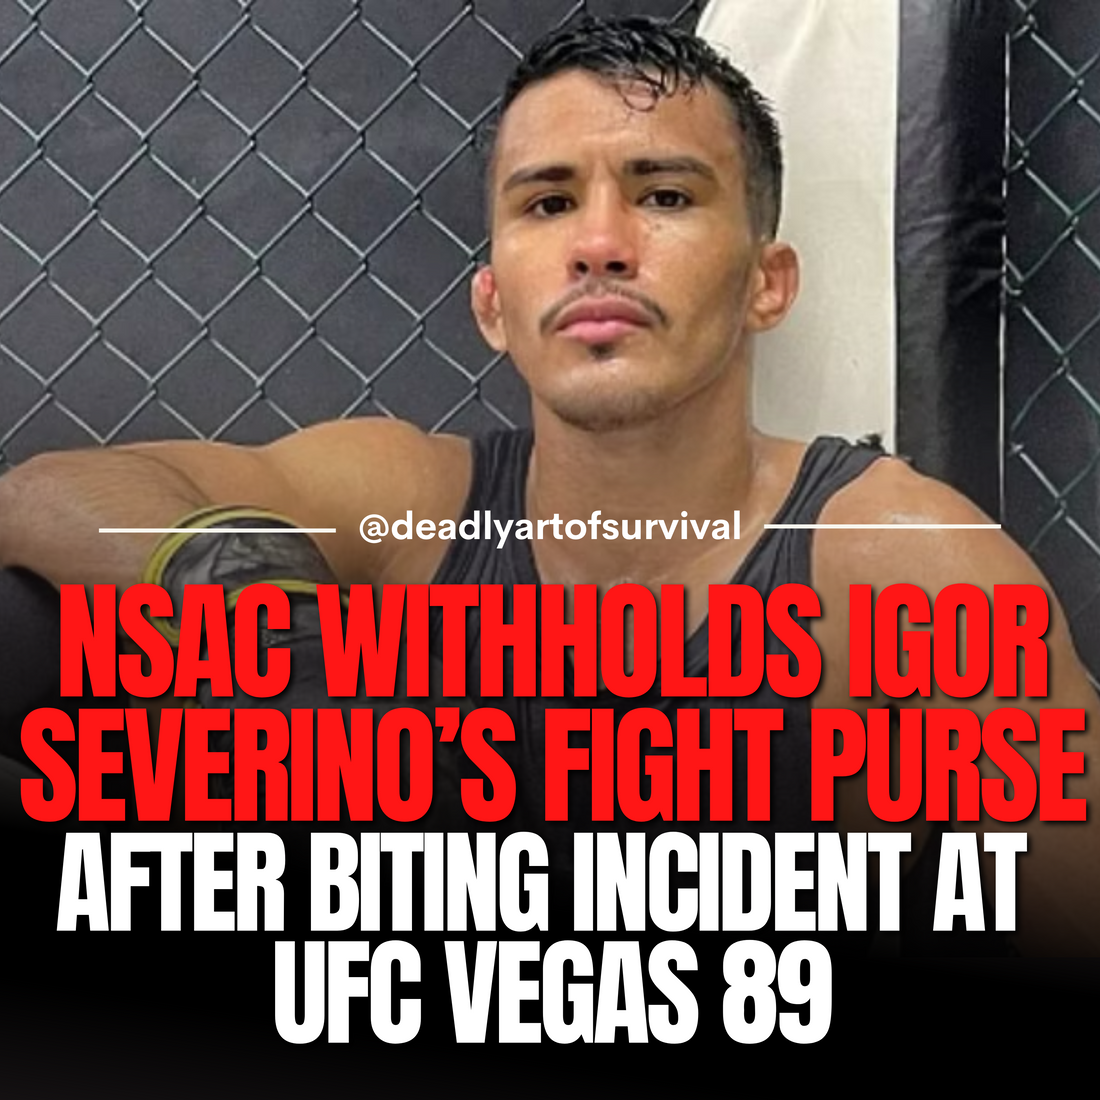 Igor-Severino-s-UFC-Payday-Bites-the-Dust-After-Controversial-Match deadlyartofsurvival.com